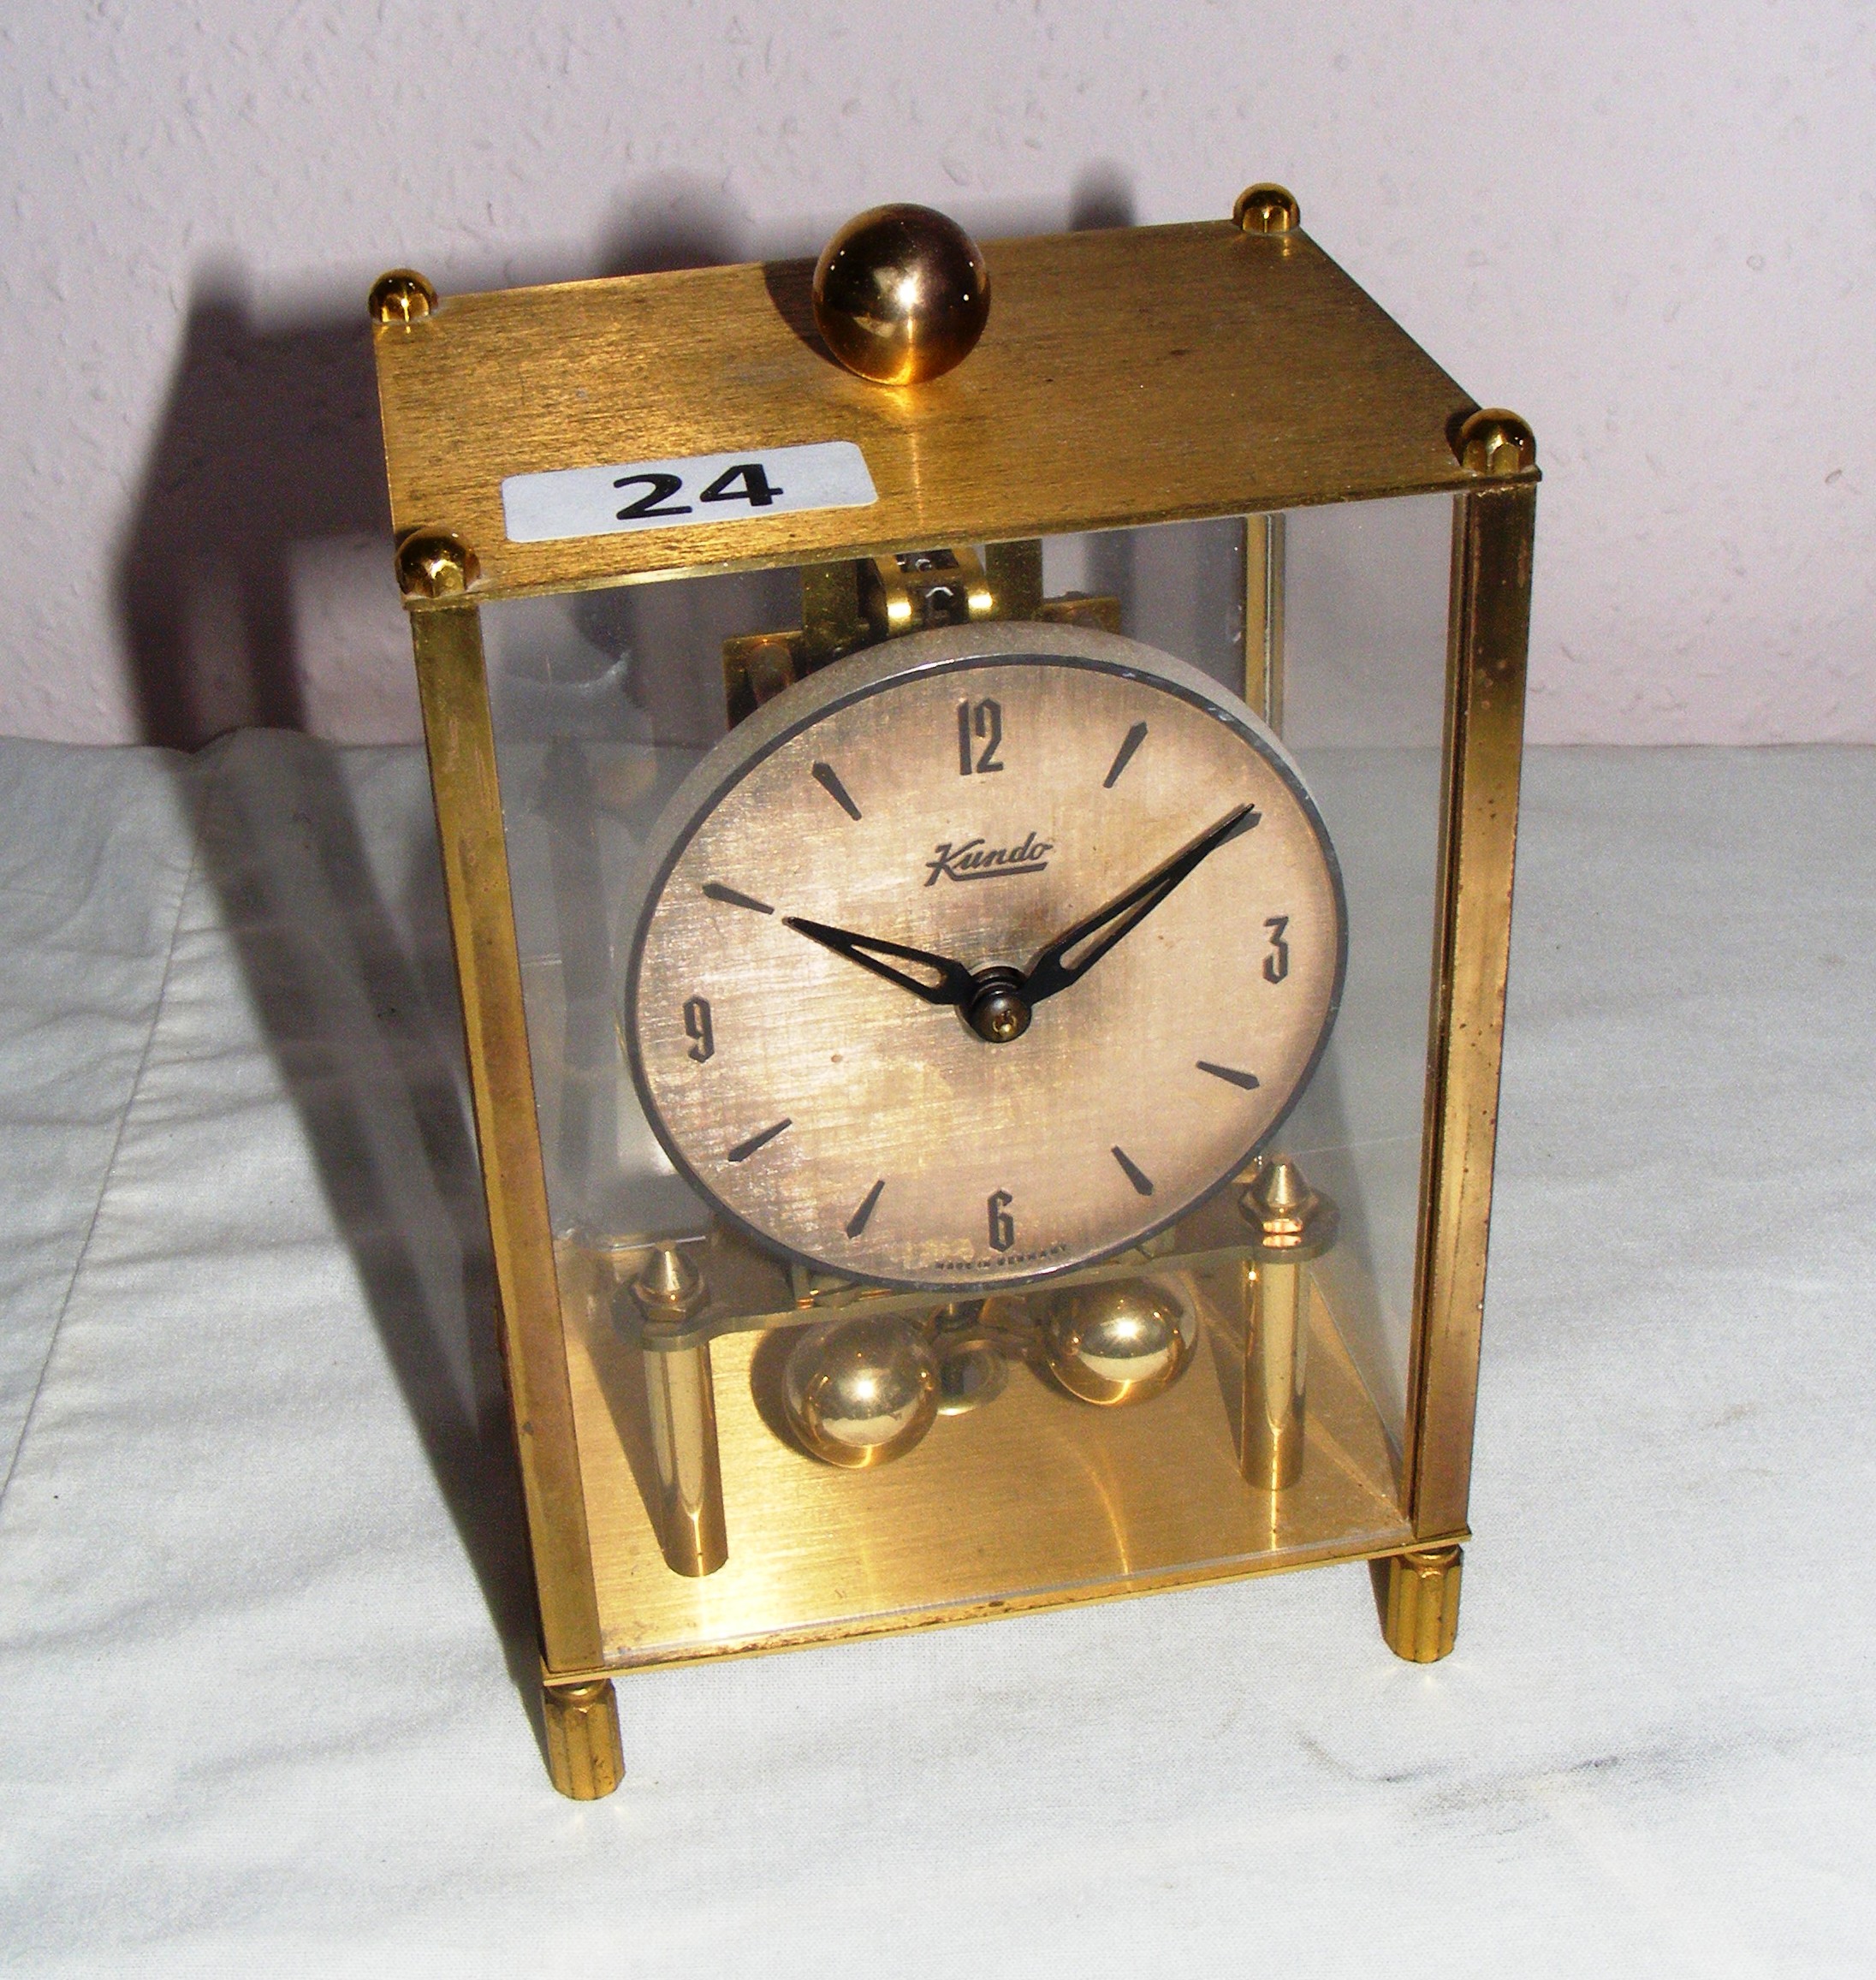 A Kundo Anniversary Clock with Kieninger & Oberdfell Movement, in a square glass case 6.75" tall.